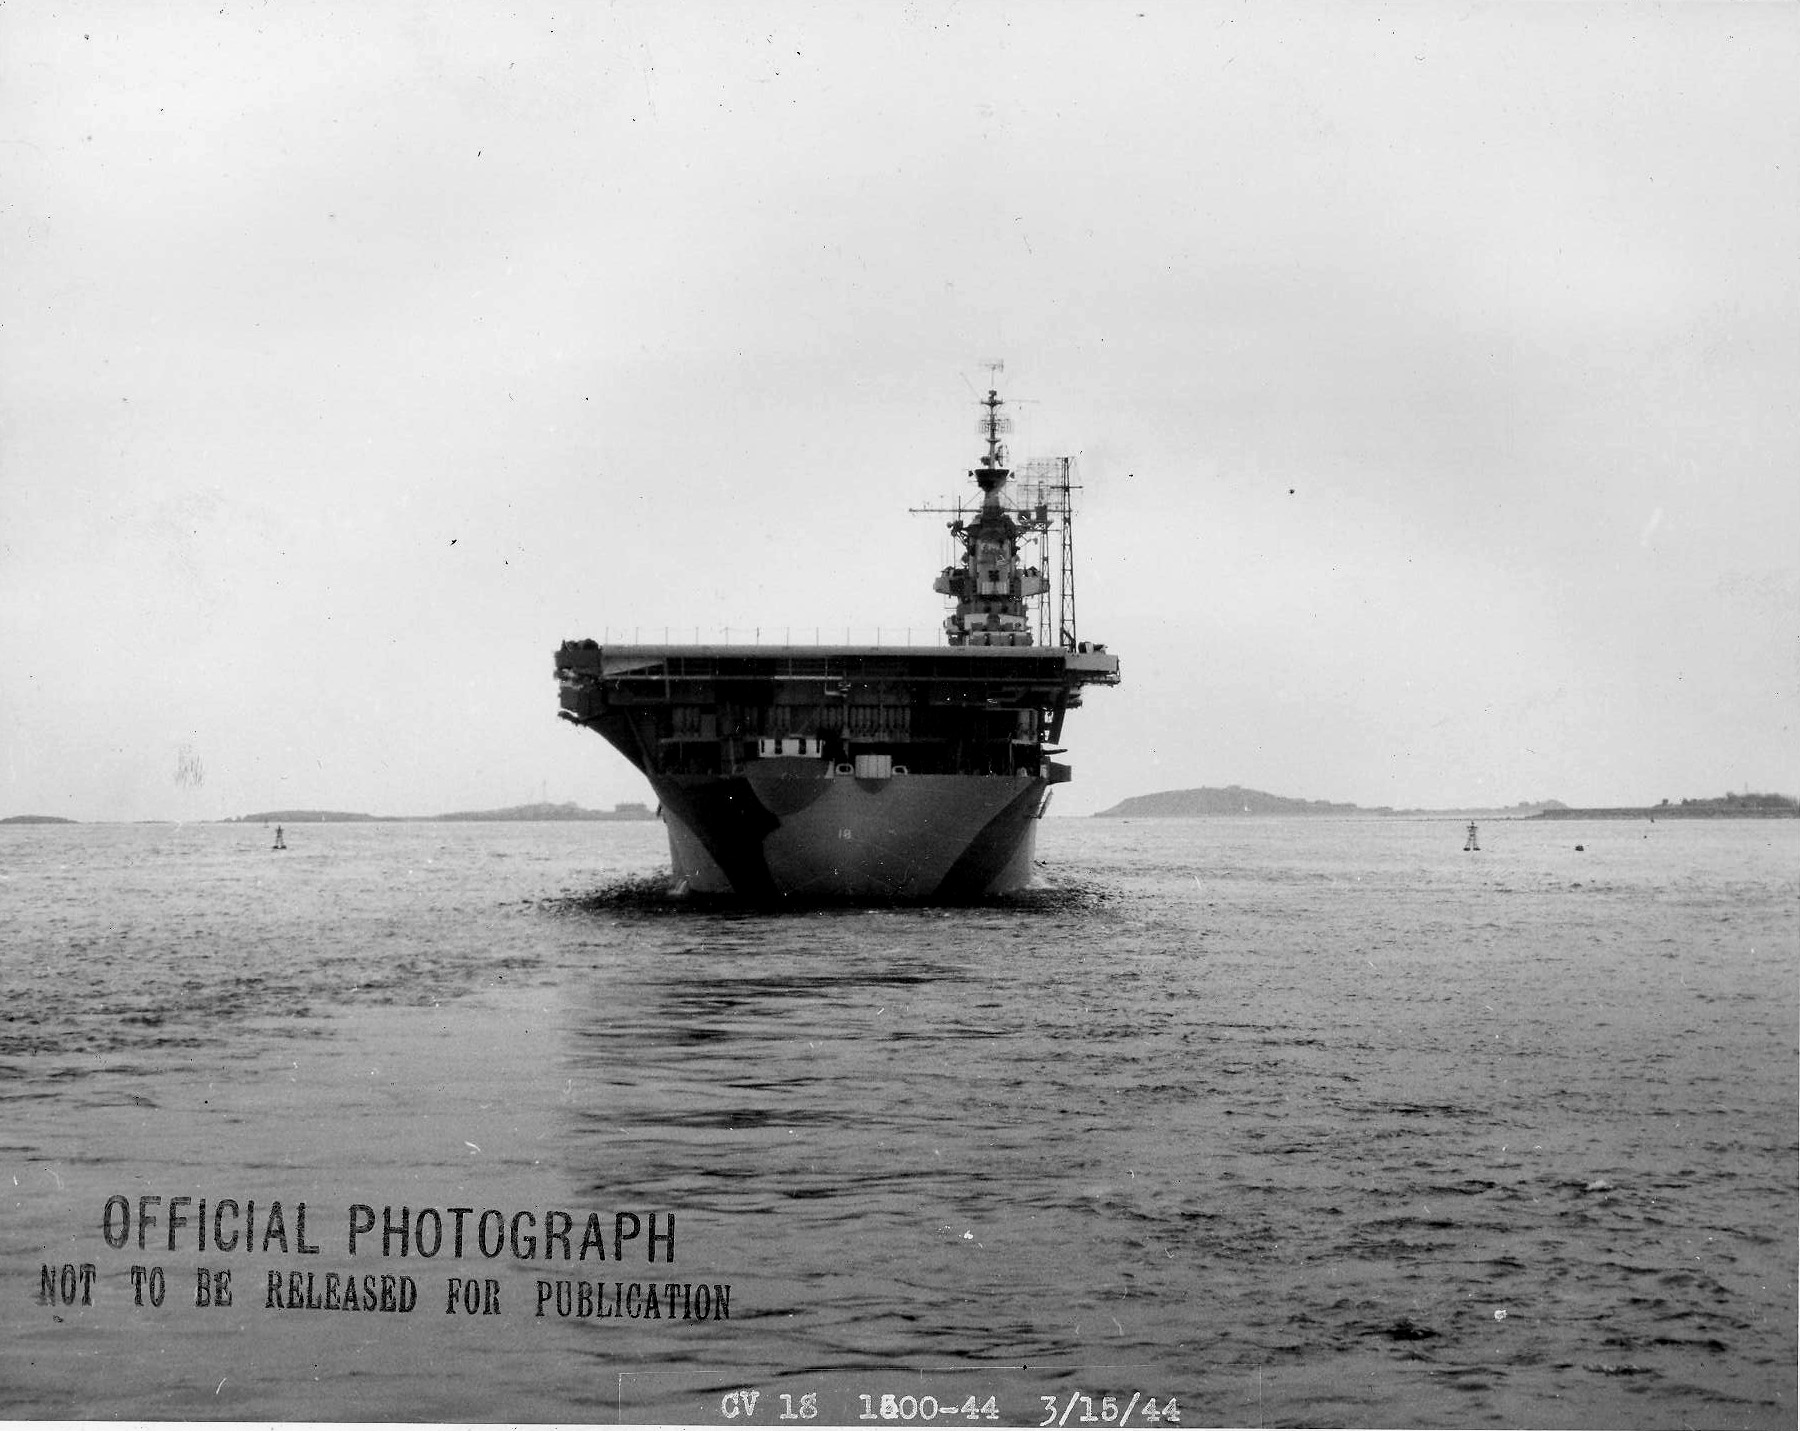 USS Wasp (Essex-class) after her shakedown cruise preparing to leave Boston, Massachusetts, United States, for the Panama Canal, 15 Mar 1944. Note Measure 33/10A camouflage. Photo 3 of 4